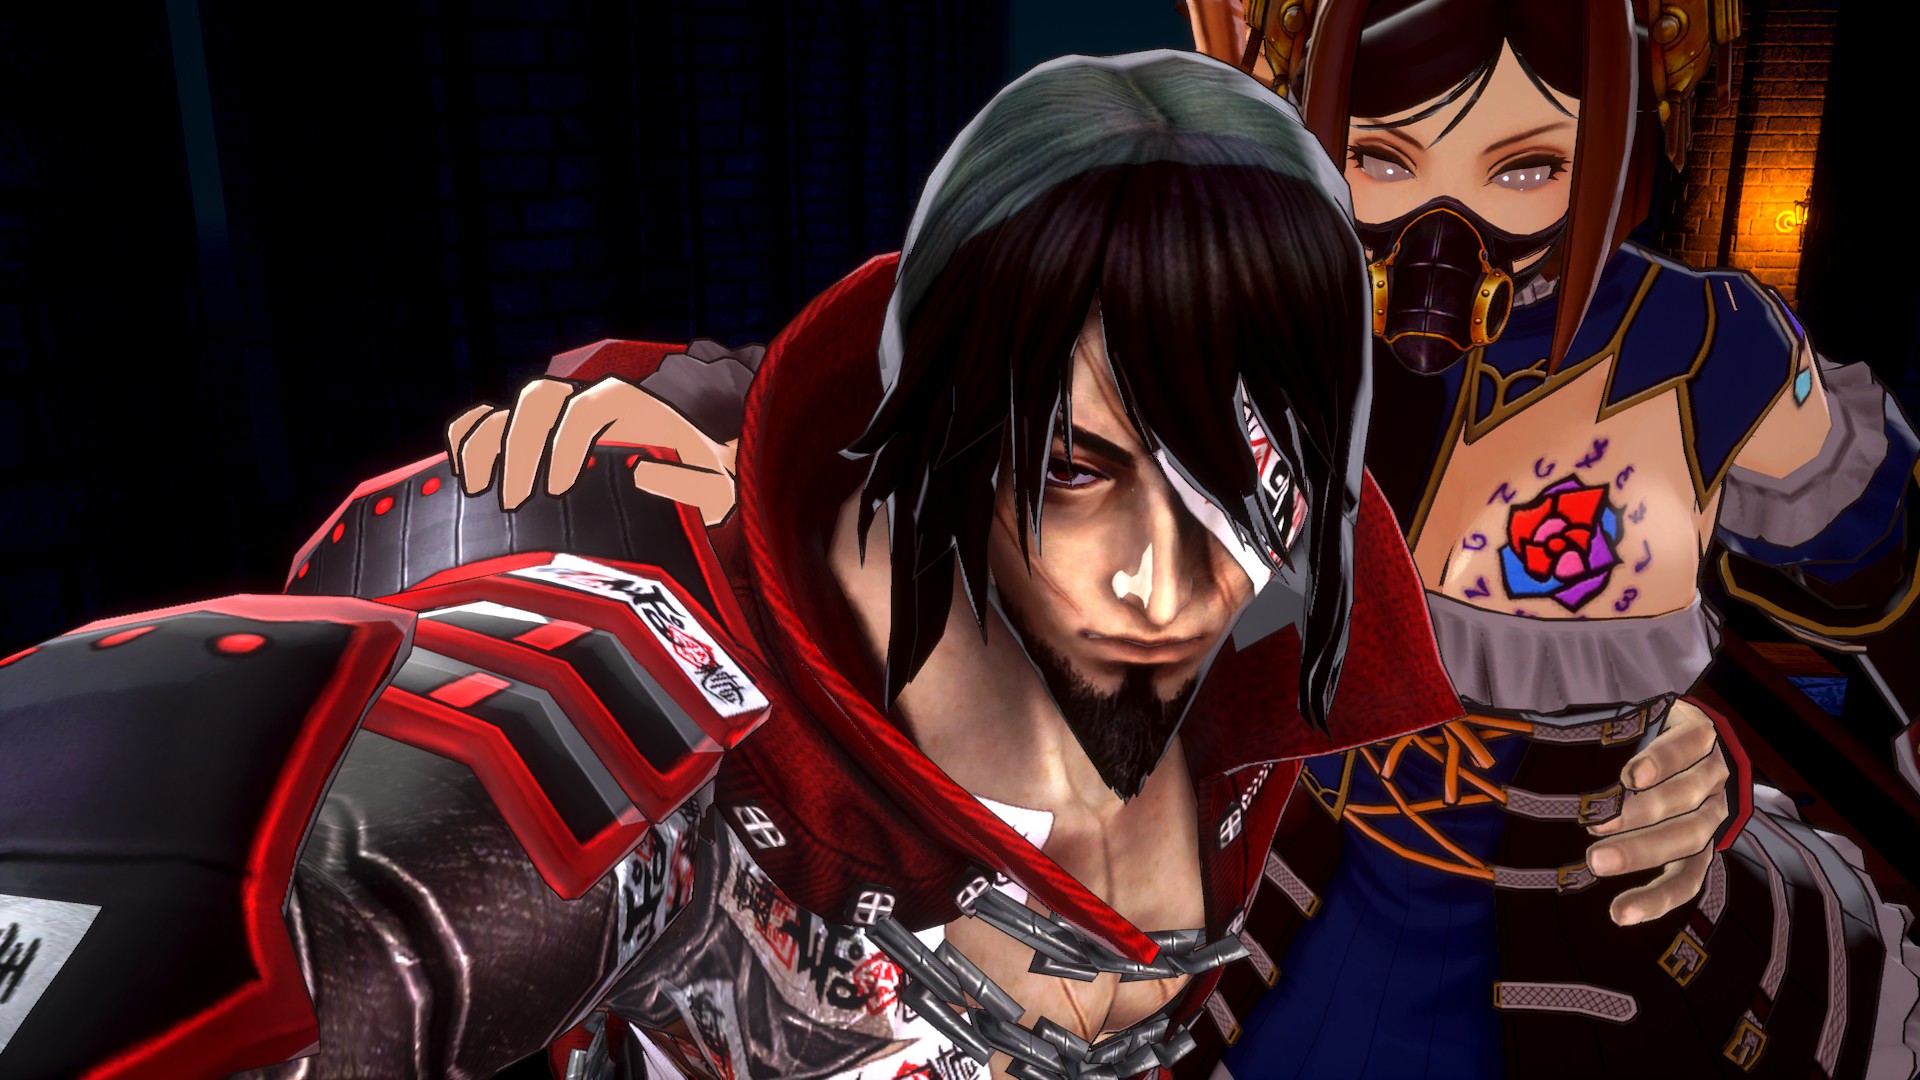 The bloodstained sack. Bloodstained ROTN. Bloodstained Jojo. Bloodstained r34. Игра Bloodstained :Roth.